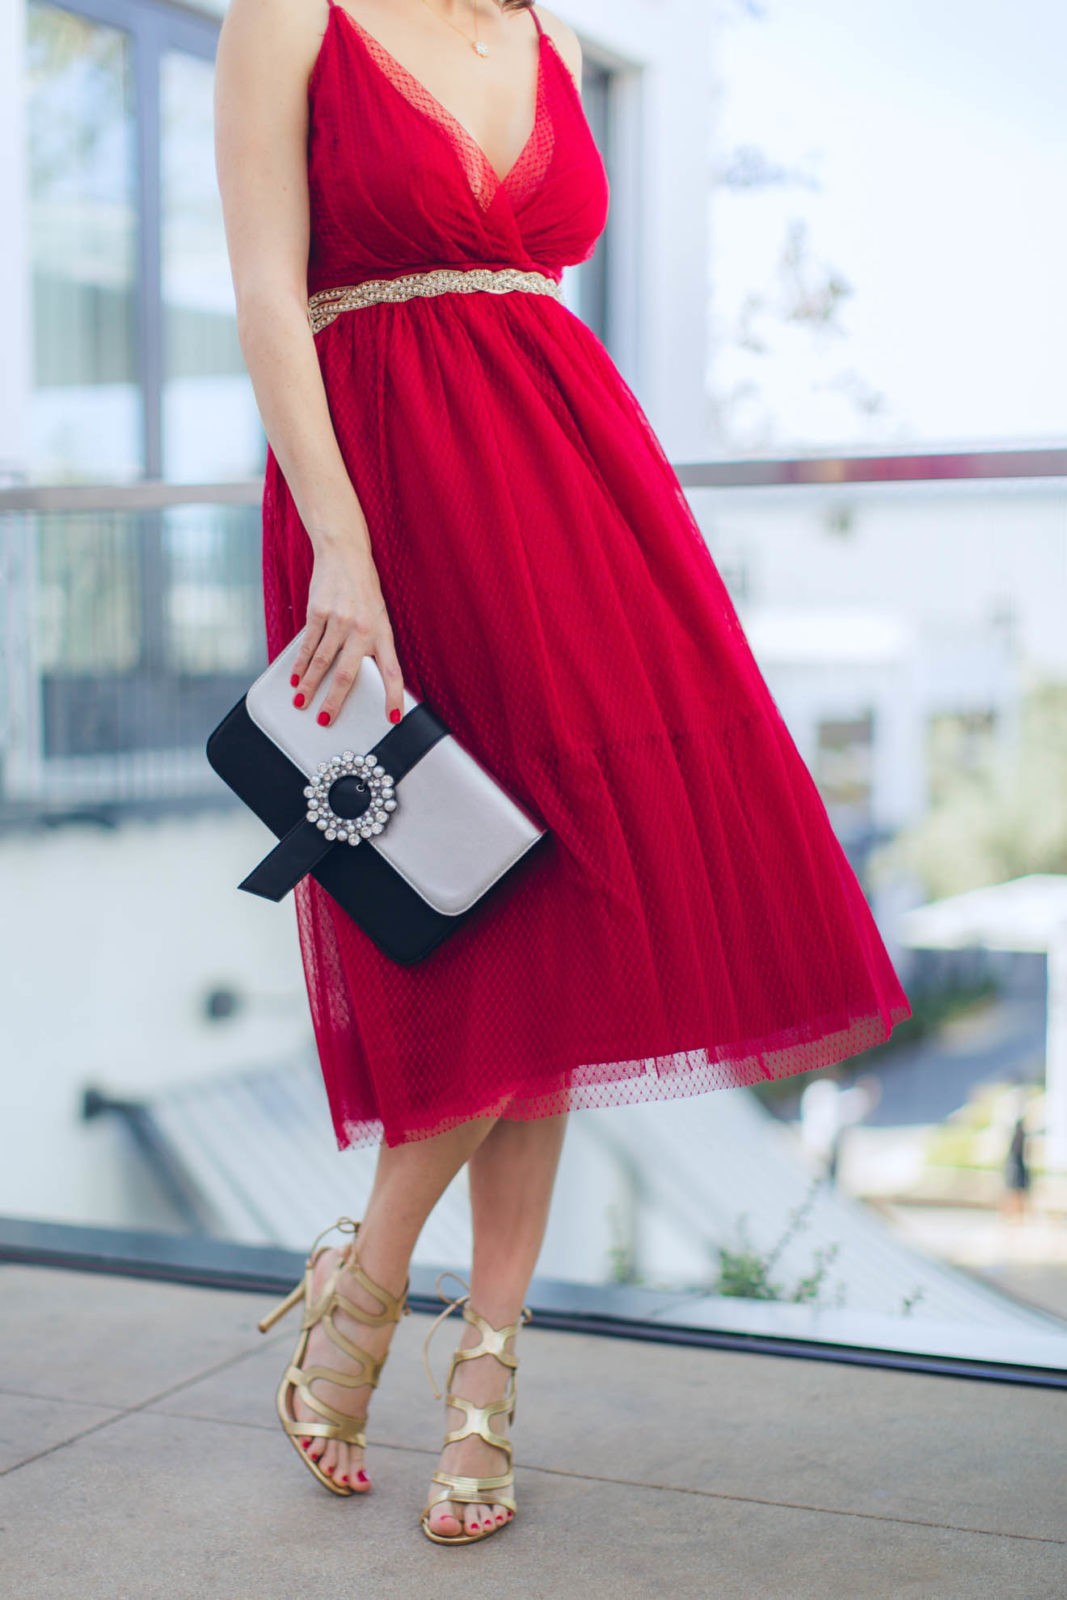 The Ultimate Holiday Outfit Guide by Fashion Blogger Laura Lily, red chiffon dress, New Year's Eve Outfit Ideas | The Ultimate Glam Holiday Outfits Guide by popular Los Angeles fashion blogger, Laura Lily: image of a woman wearing a red tulle dress and gold sandal heels. 